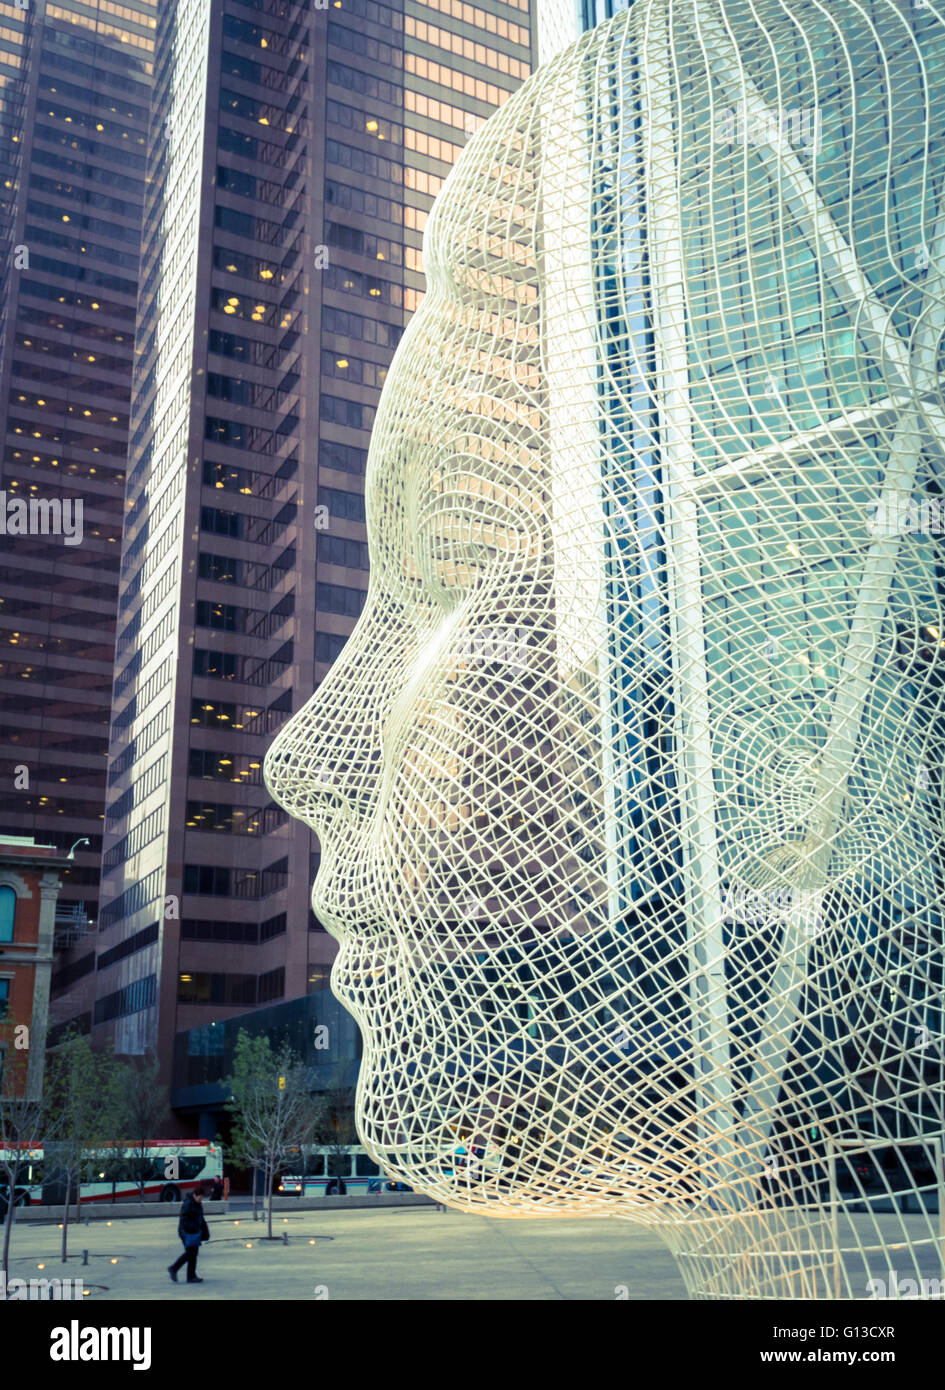 A view of the sculpture Wonderland by Jaume Plensa, in front of The Bow  skyscraper in Calgary, Alberta, Canada Stock Photo - Alamy